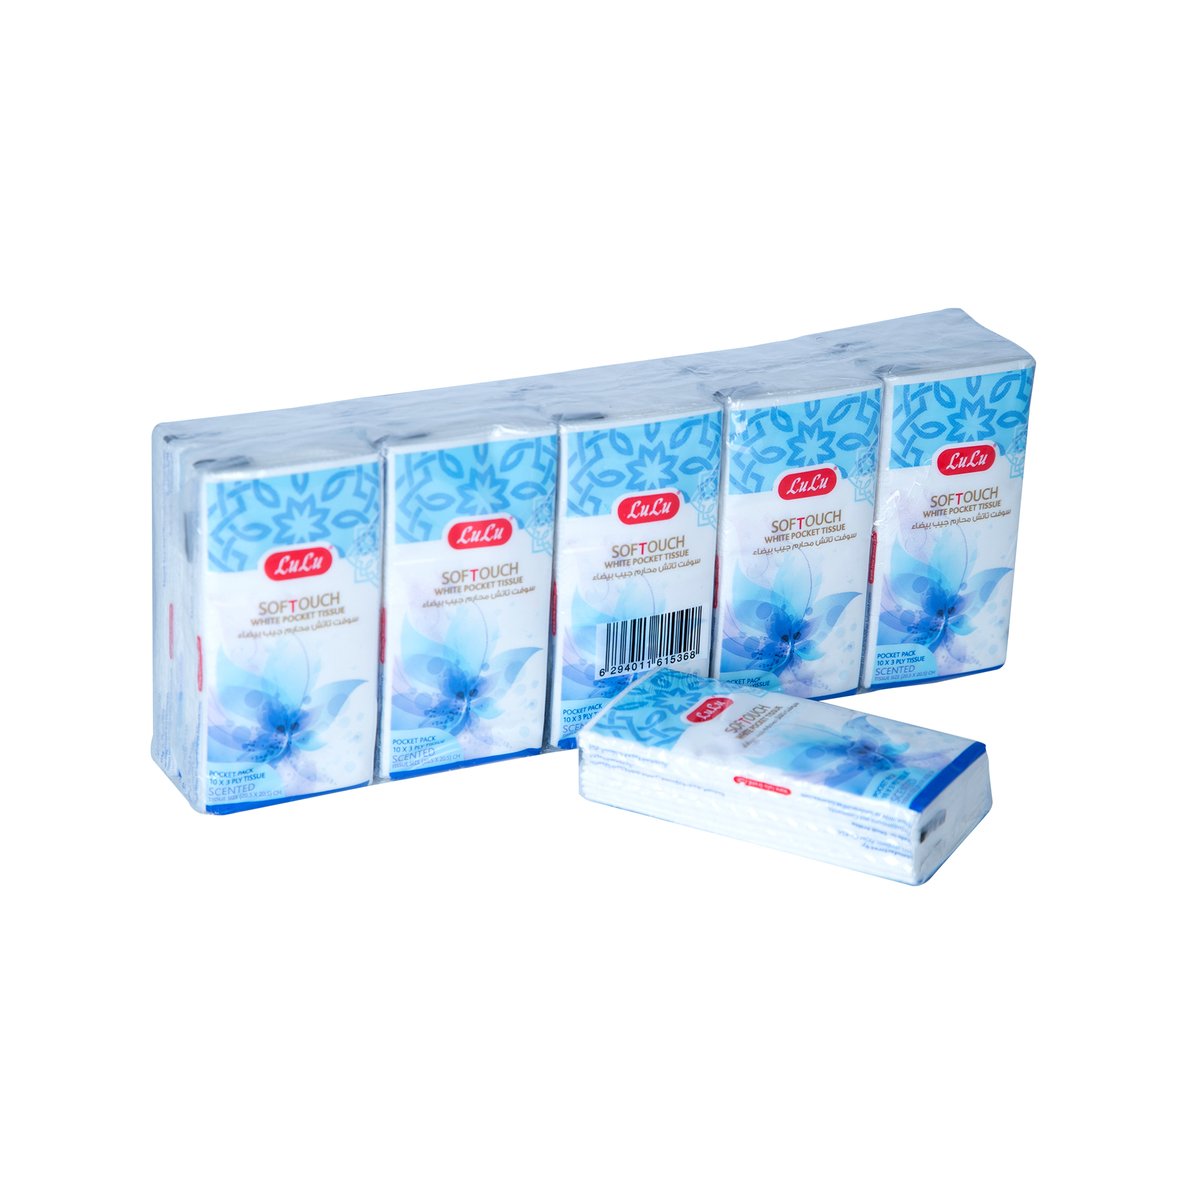 LuLu Softouch Facial Pocket Tissue 3ply 10 x 10 Sheets